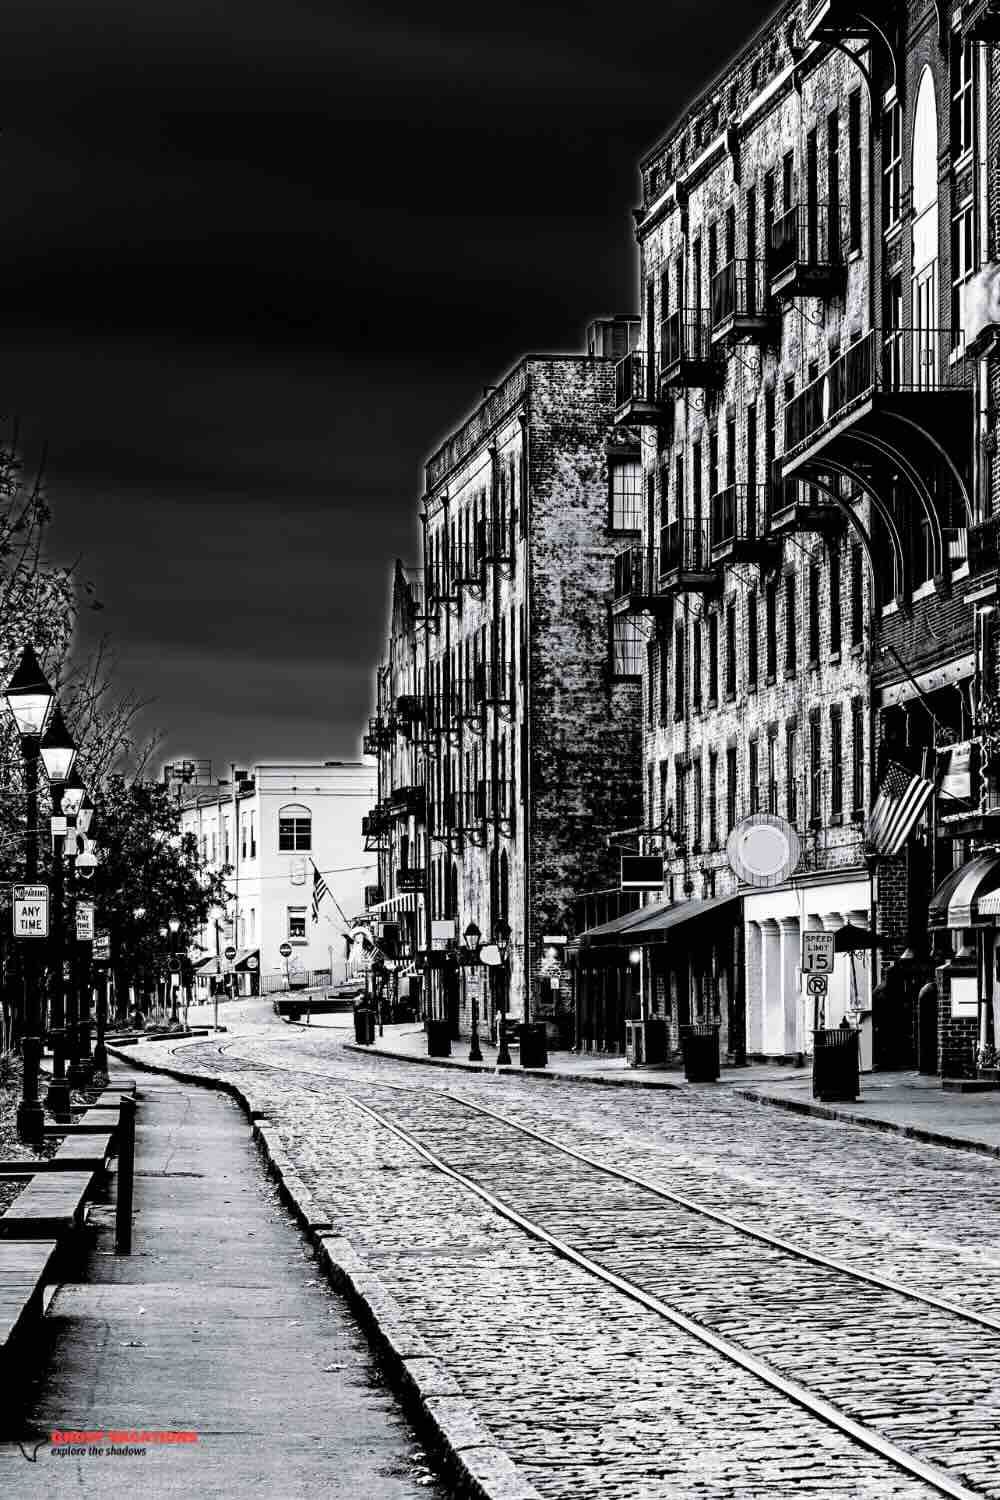 "Historic River Street in Savannah, GA, lined with charming pubs and shops, ideal for ghost pub tours Savannah GA to experience eerie tales and vibrant nightlife."